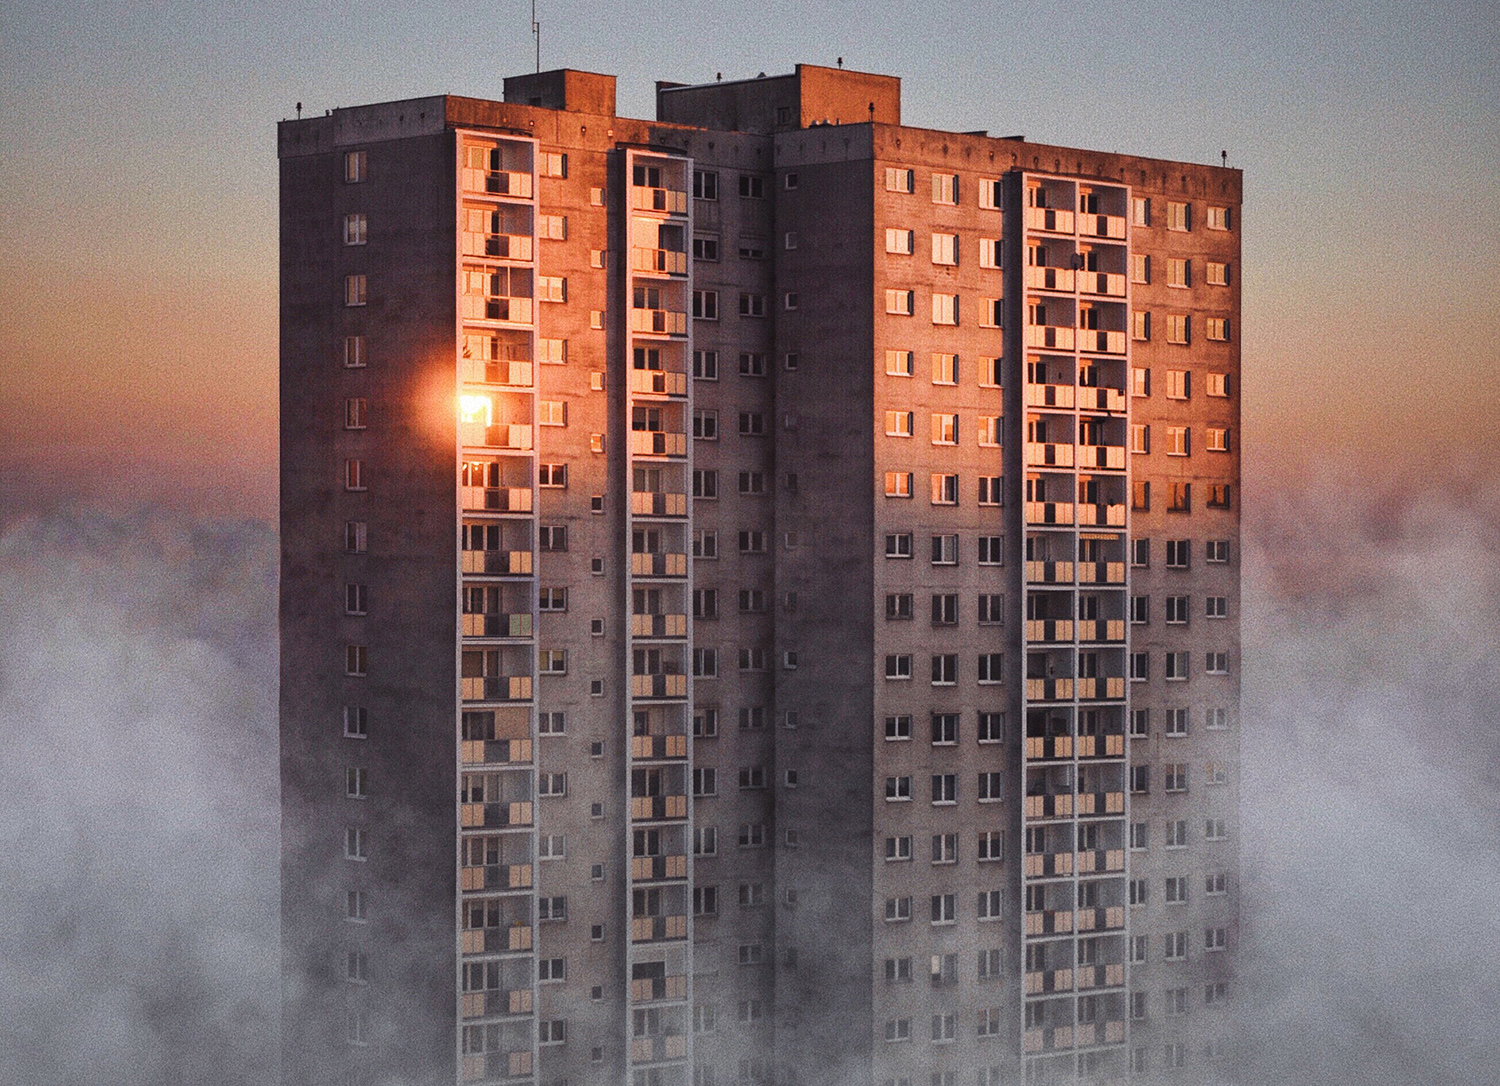 One mighty communist tower block outgrows Poznań | The Calvert Journal Shop